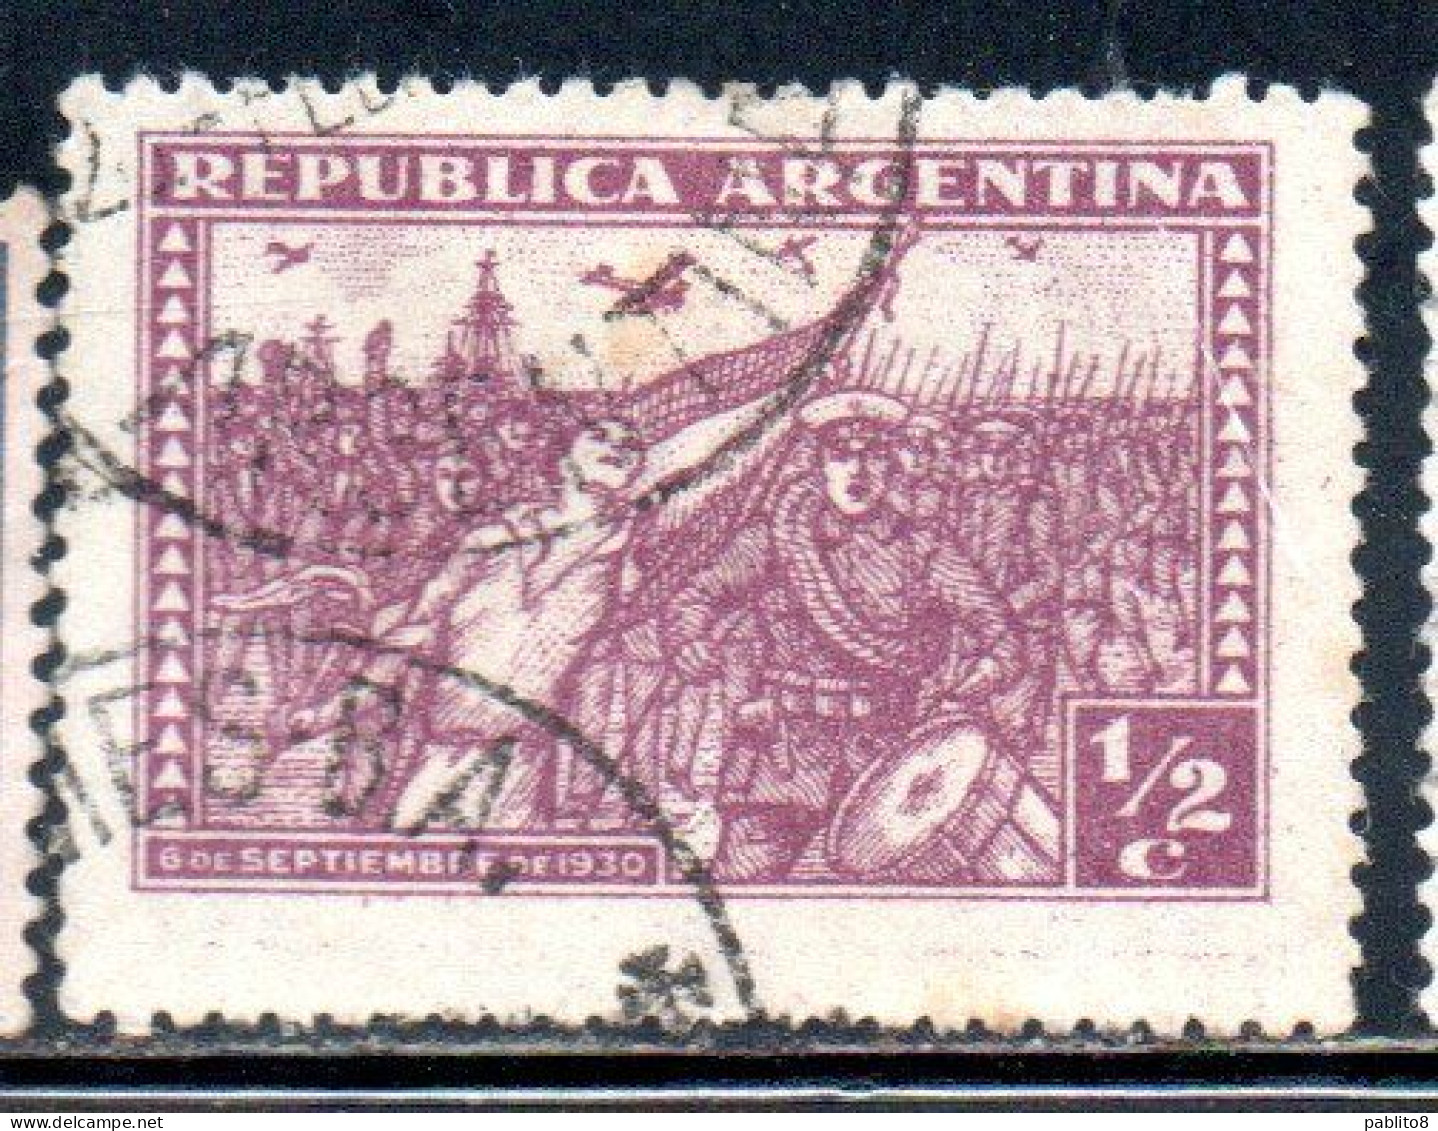 ARGENTINA 1931 REVOLUTION OF 1930 MARCH OF THE VICTORIOUS INSURGENS 1/2c USED USADO OBLITERE' - Oblitérés